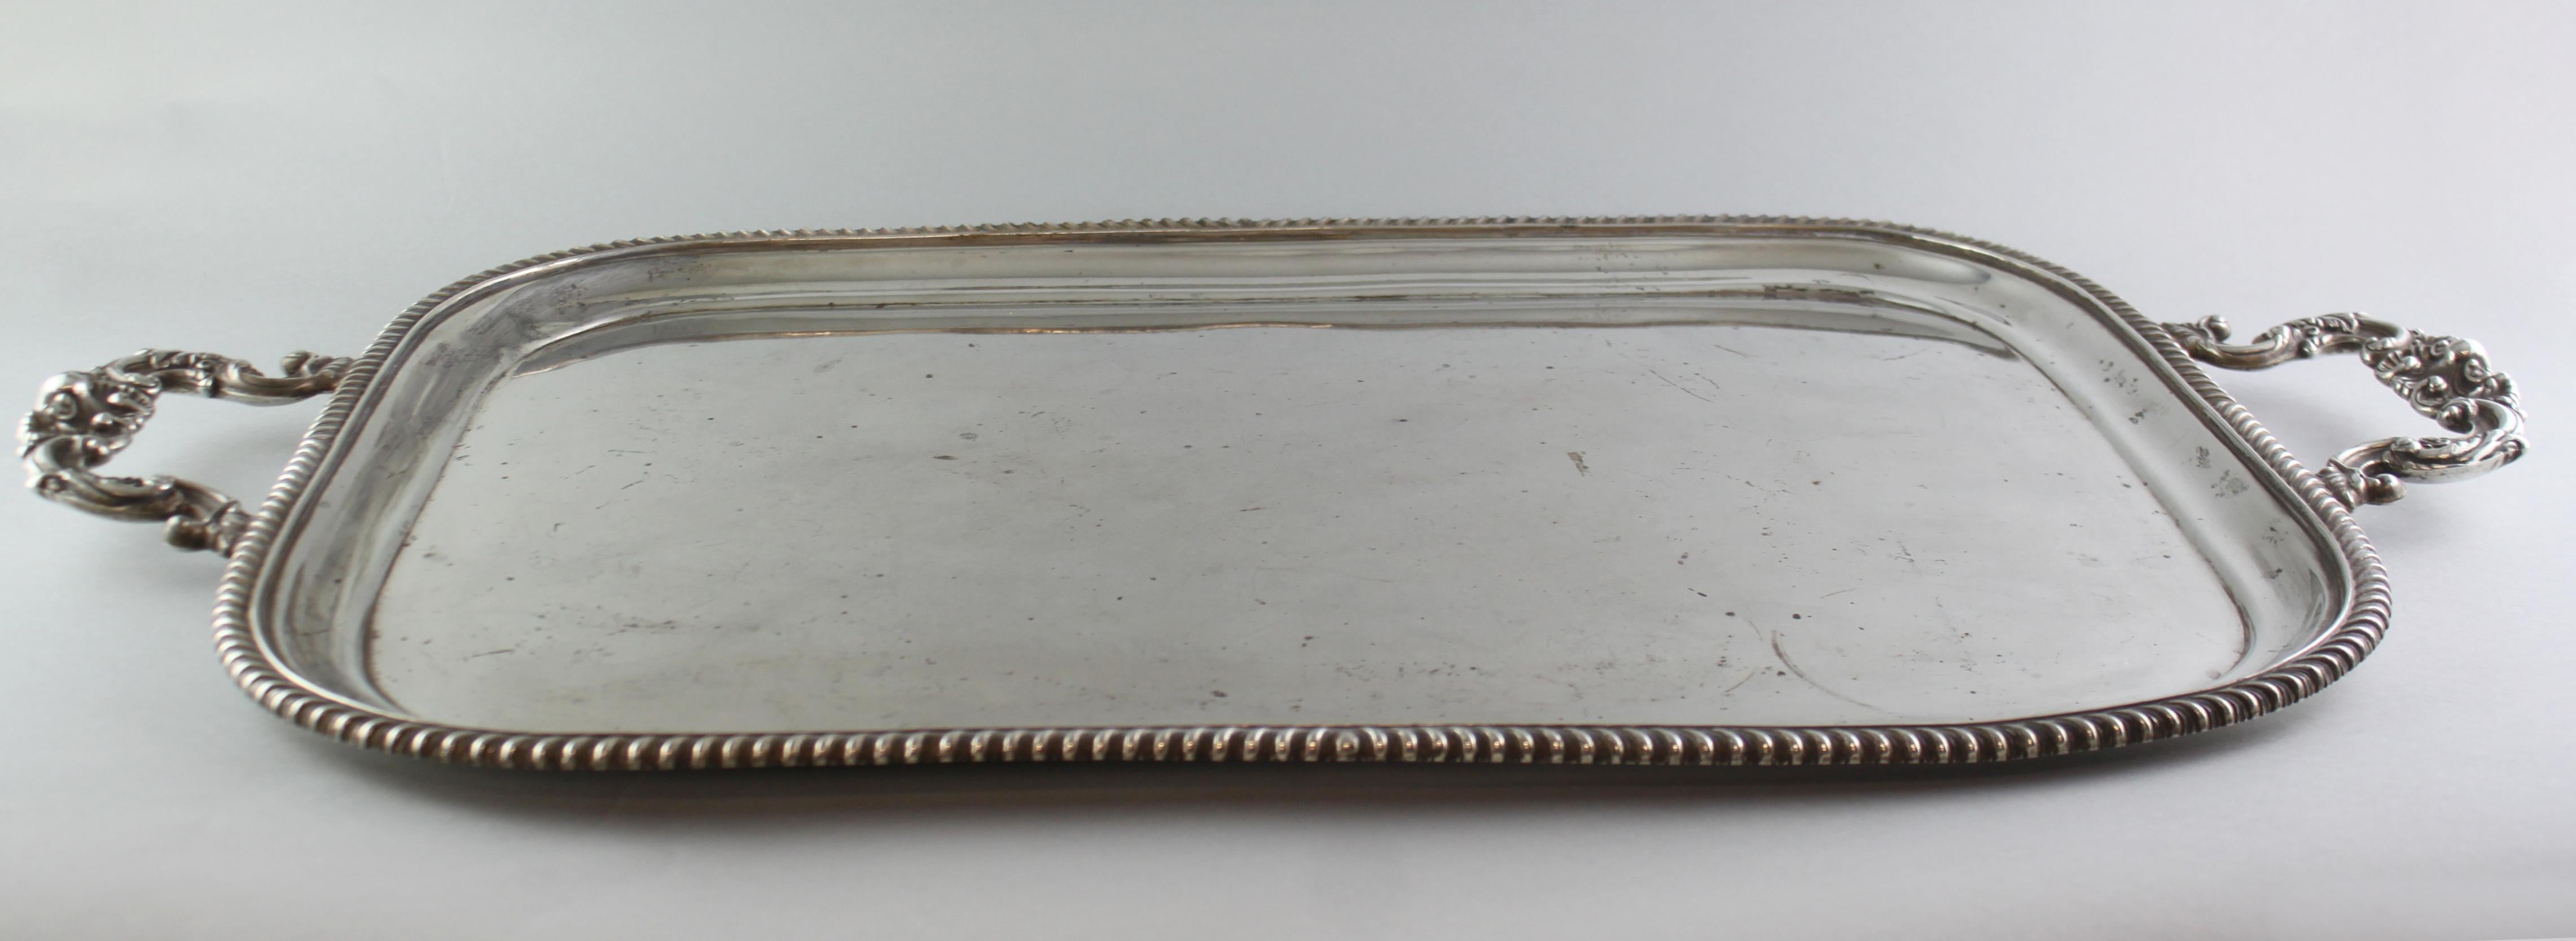 British Antique Sterling Silver Large Serving Tray, Chester 1912, Barker Brothers